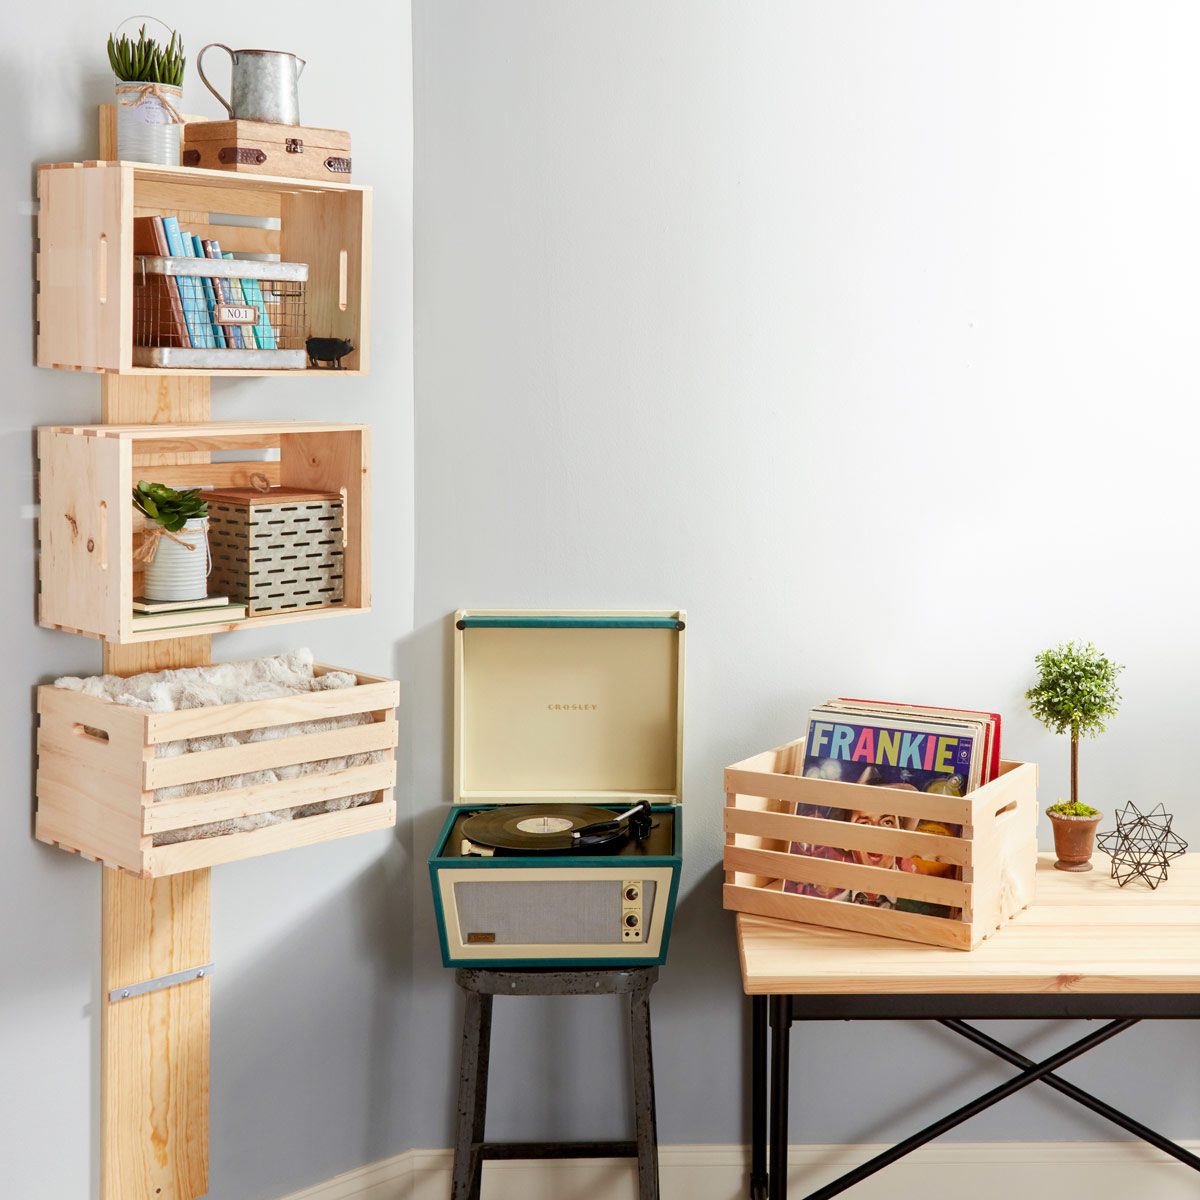 How To Make An Easy Wooden Crate Shelf Family Handyman